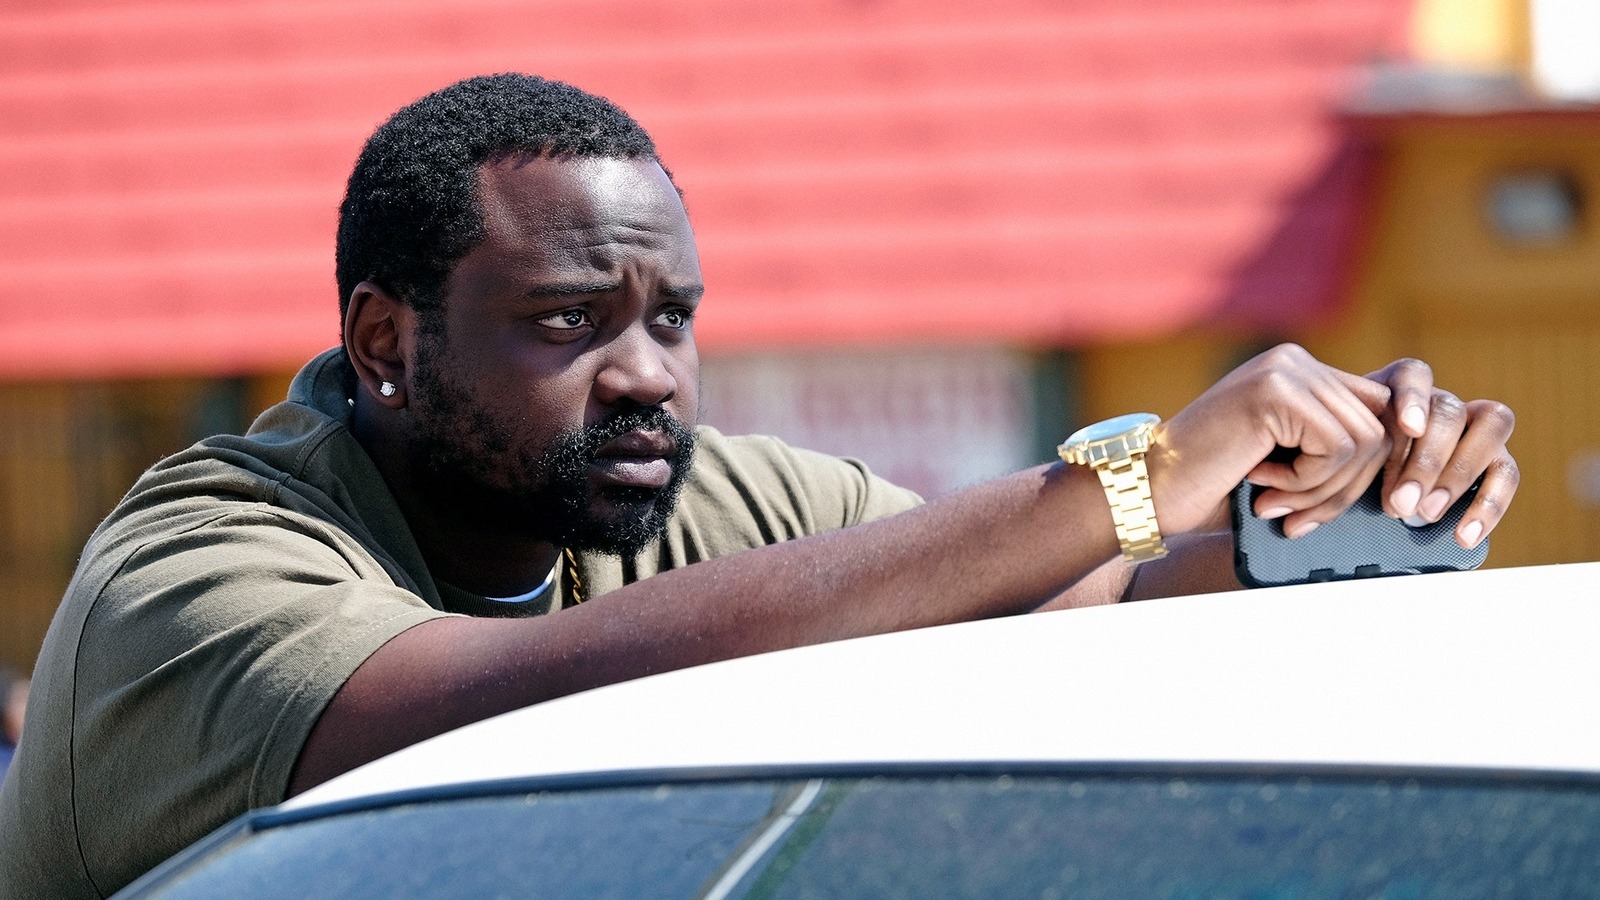 #Rachel Morrison’s Boxing Drama Flint Strong Adds Brian Tyree Henry, Resumes Filming After A Two-Year Gap